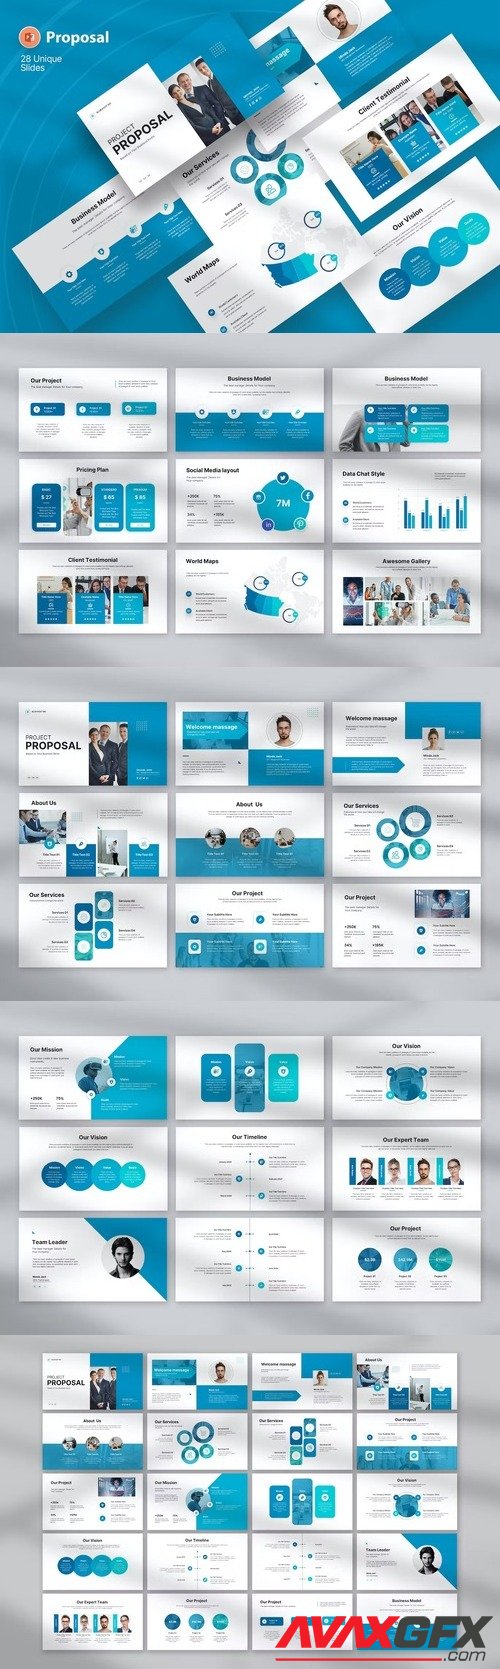 Project Proposal PowerPoint Presentation [PPTX]